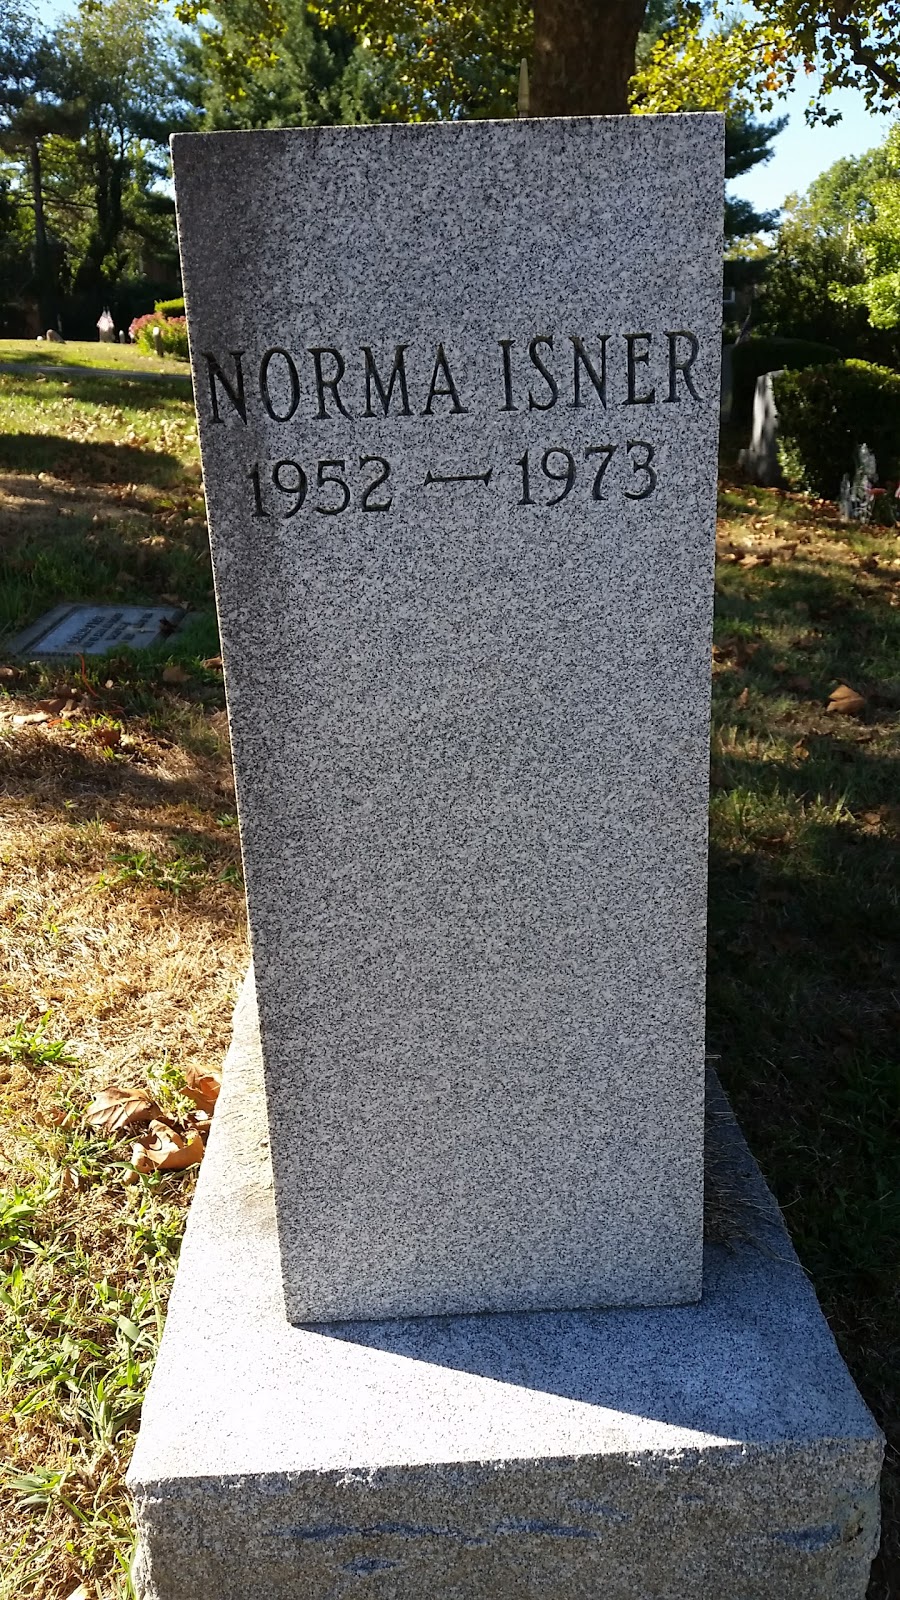 Chester Rural Cemetery | 441 W 21st St, Chester, PA 19013 | Phone: (610) 872-3121